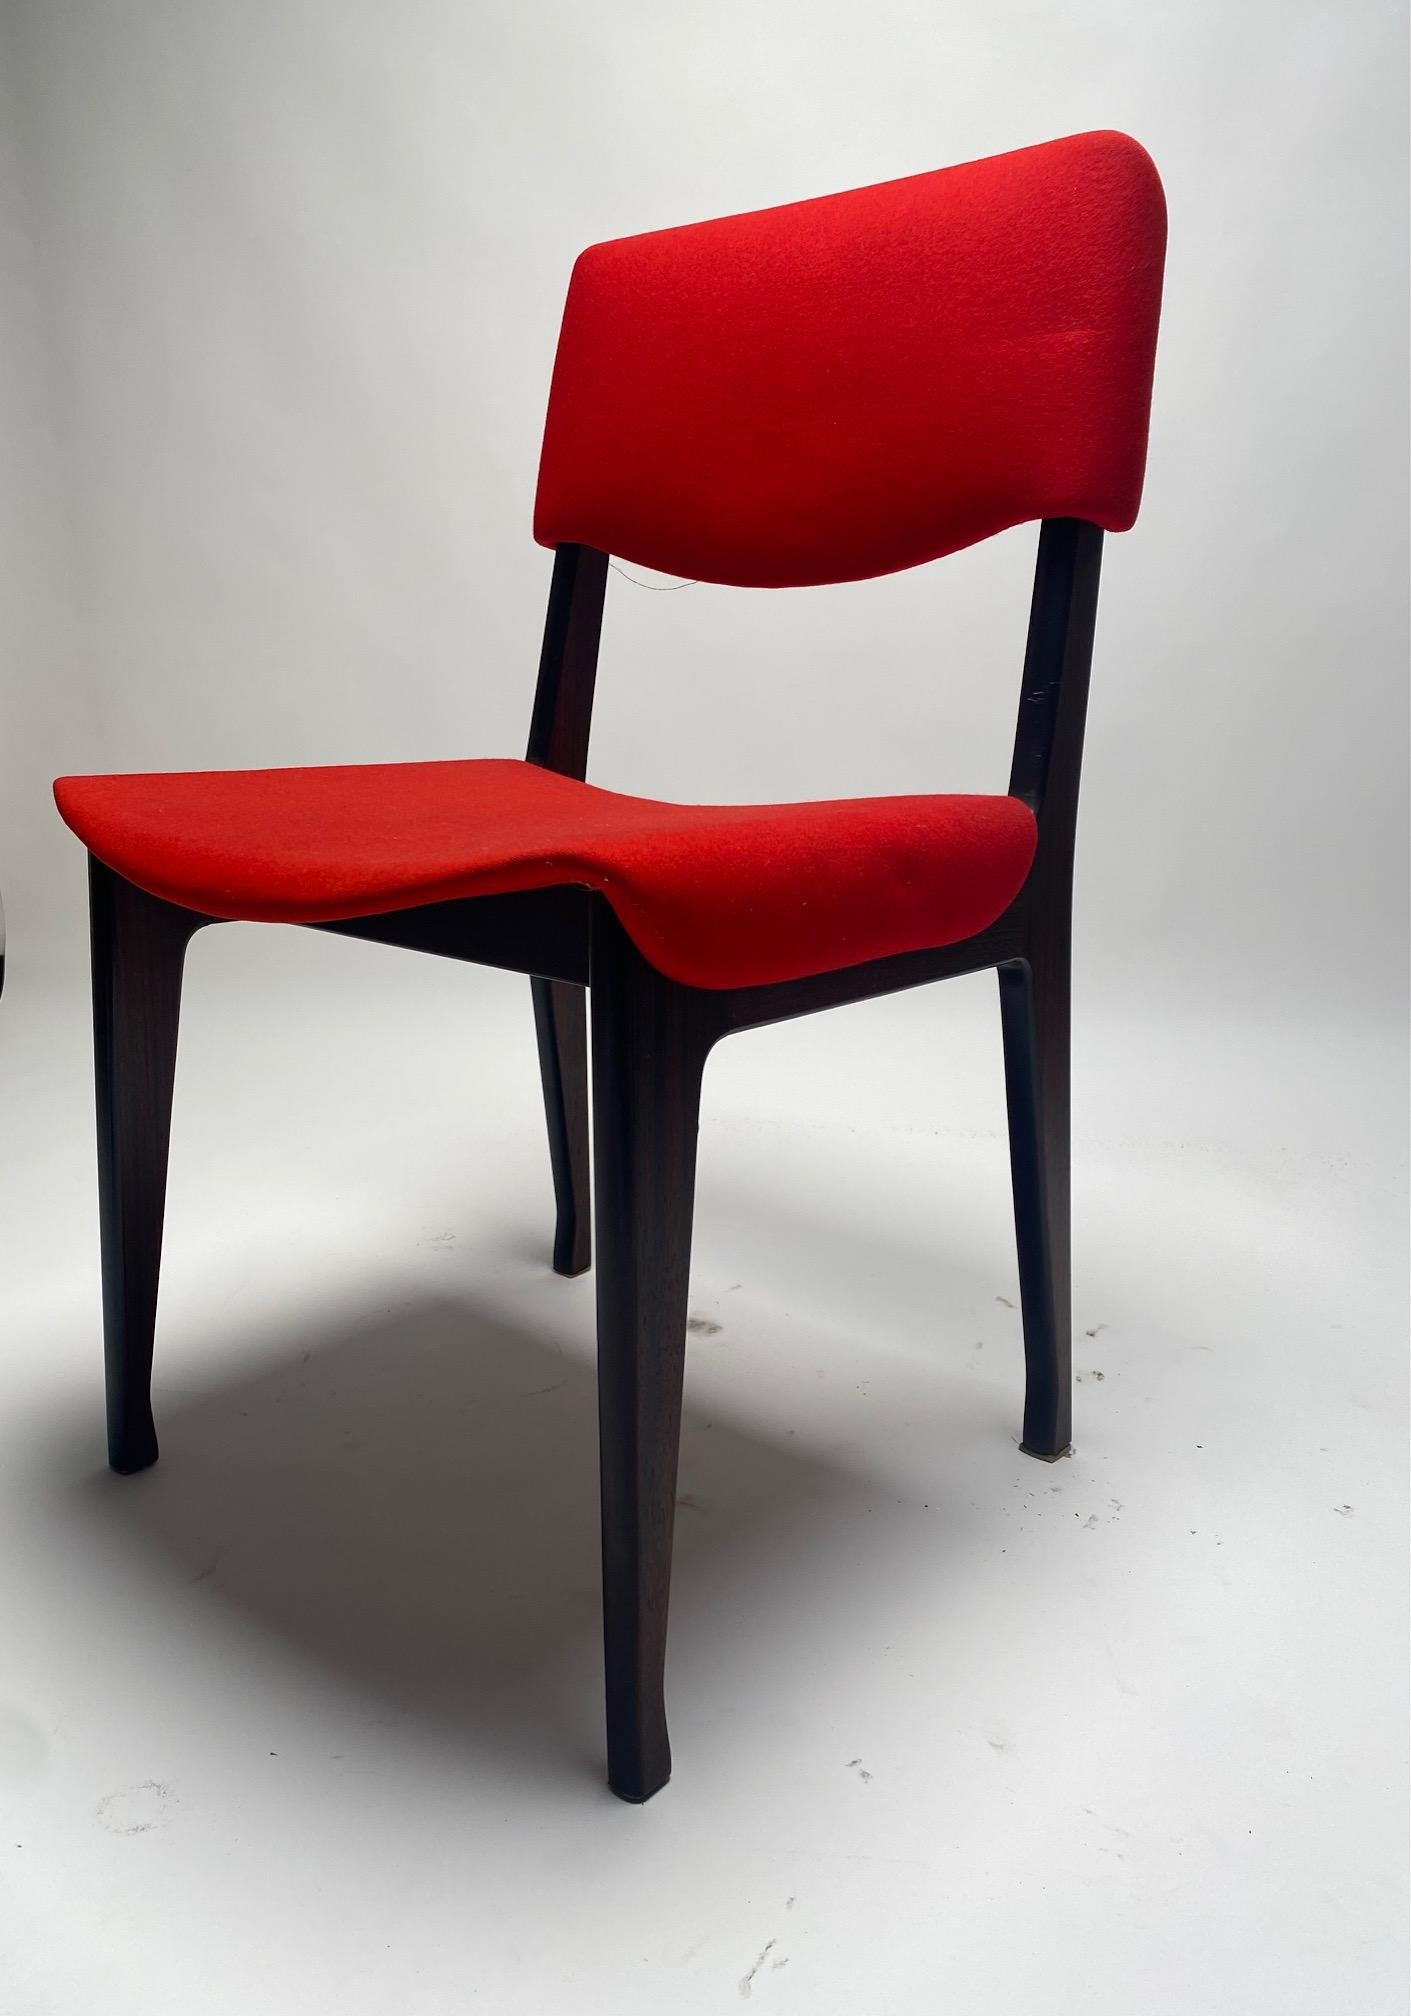 Set of four chairs by Ico Parisi for Mim, Italy, 1960s.

Four chairs with wooden structure and red fabric padding, designed by Ico Parisi for the MIM company in Rome. An elegant and comfortable chair made by one of the most important Italian